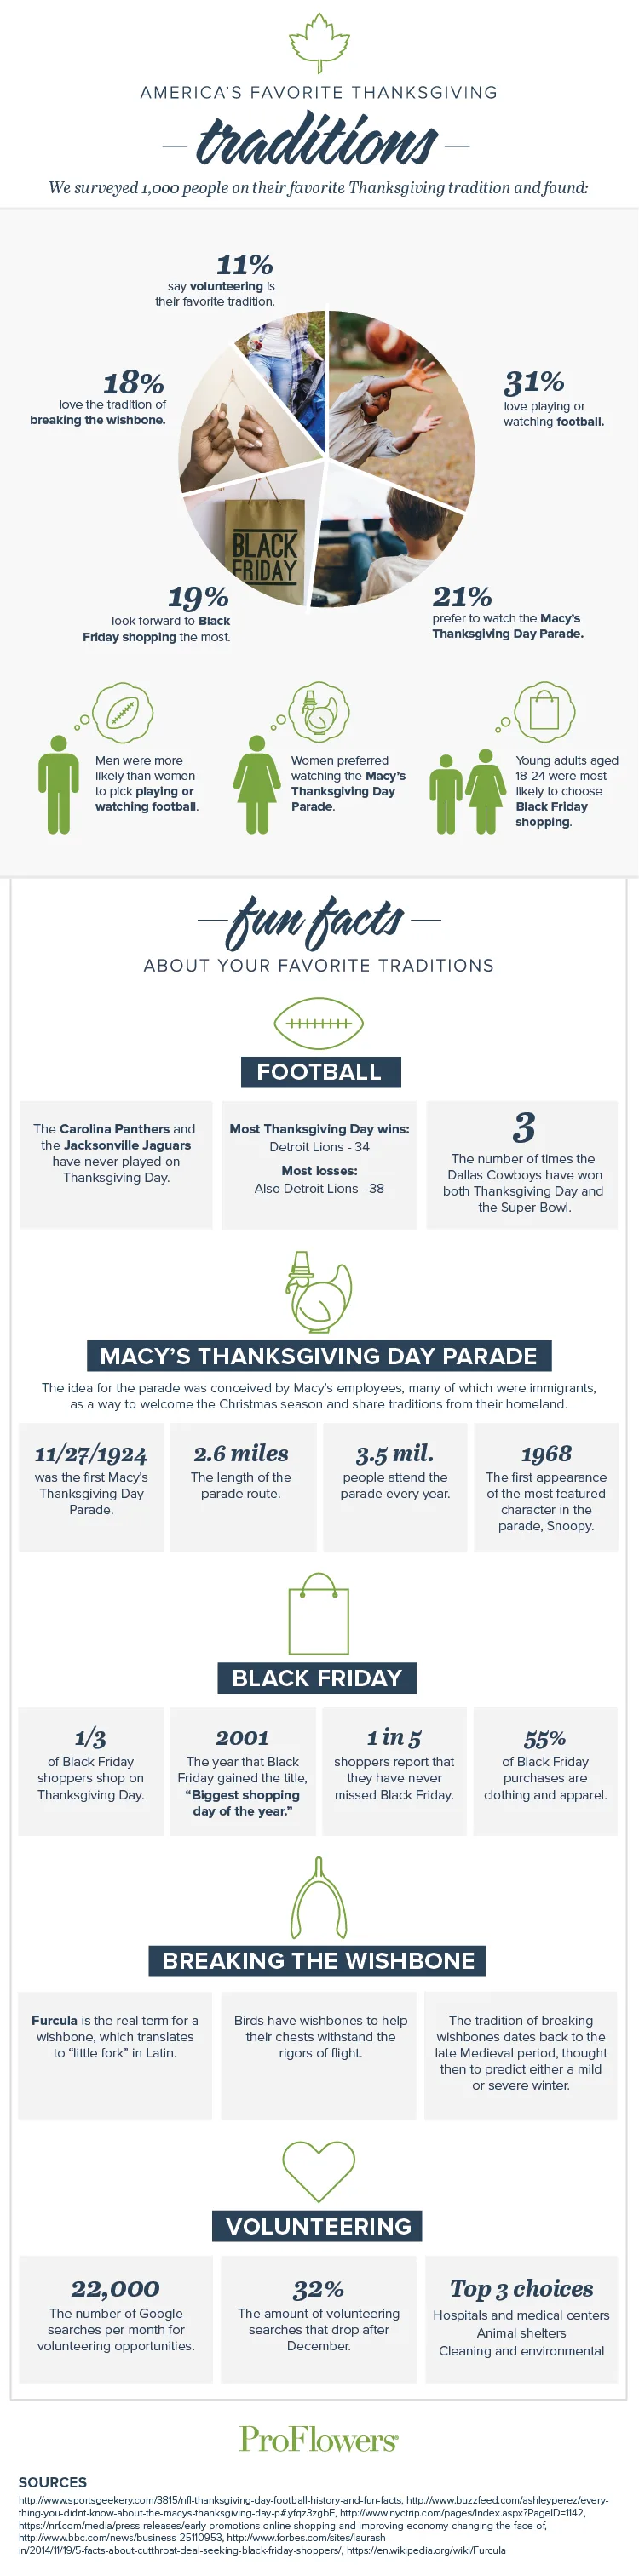 America's Favorite Thanksgiving Traditions